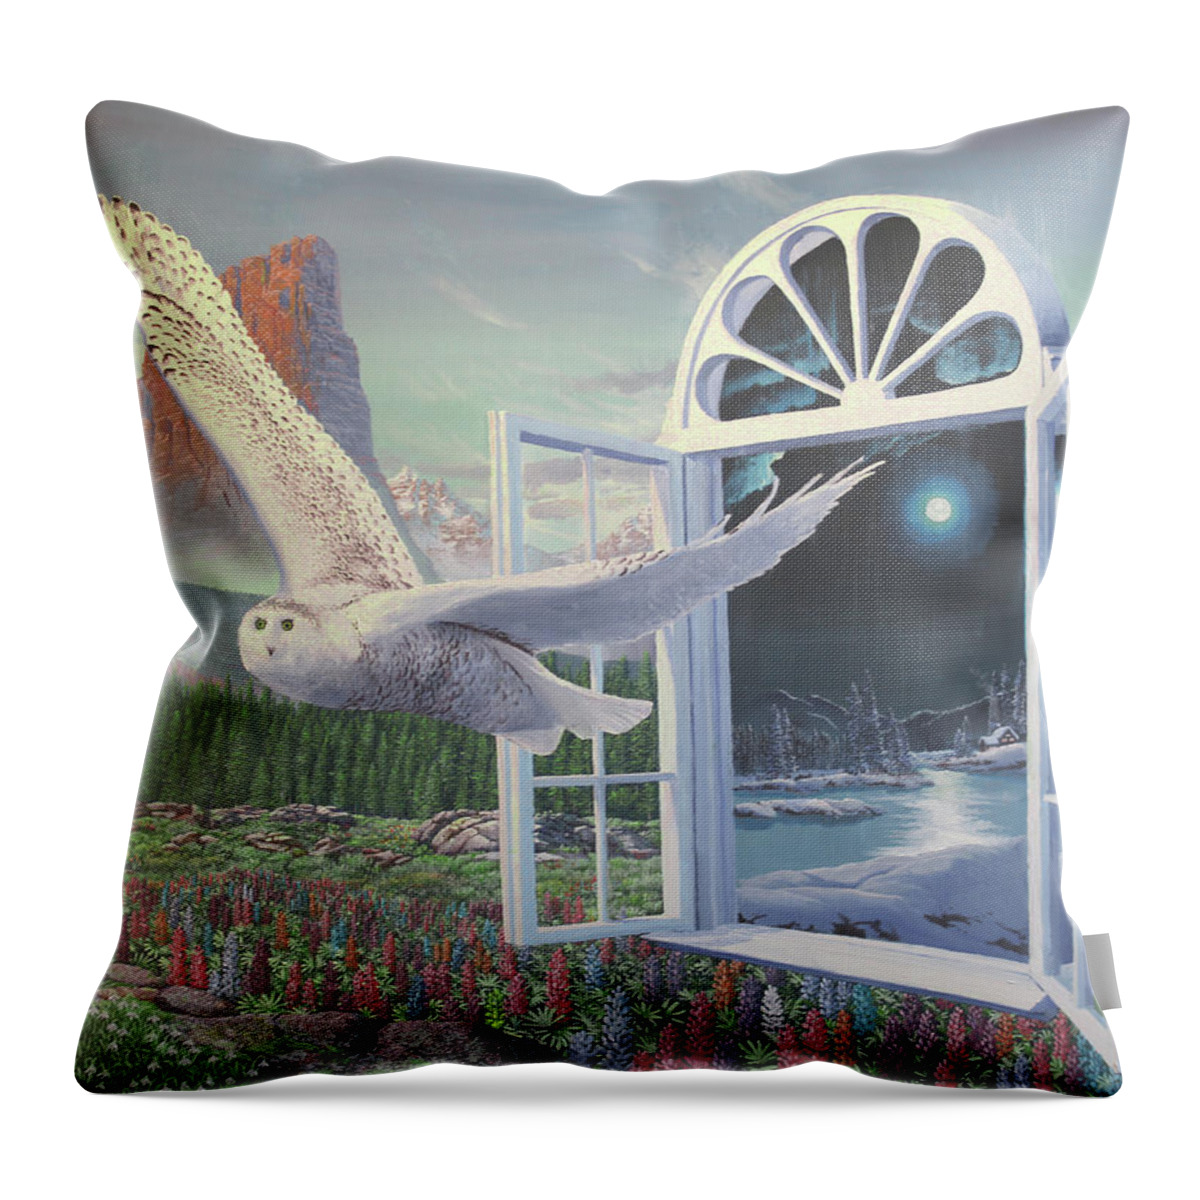 Snowy Throw Pillow featuring the painting On the Wing by Michael Goguen